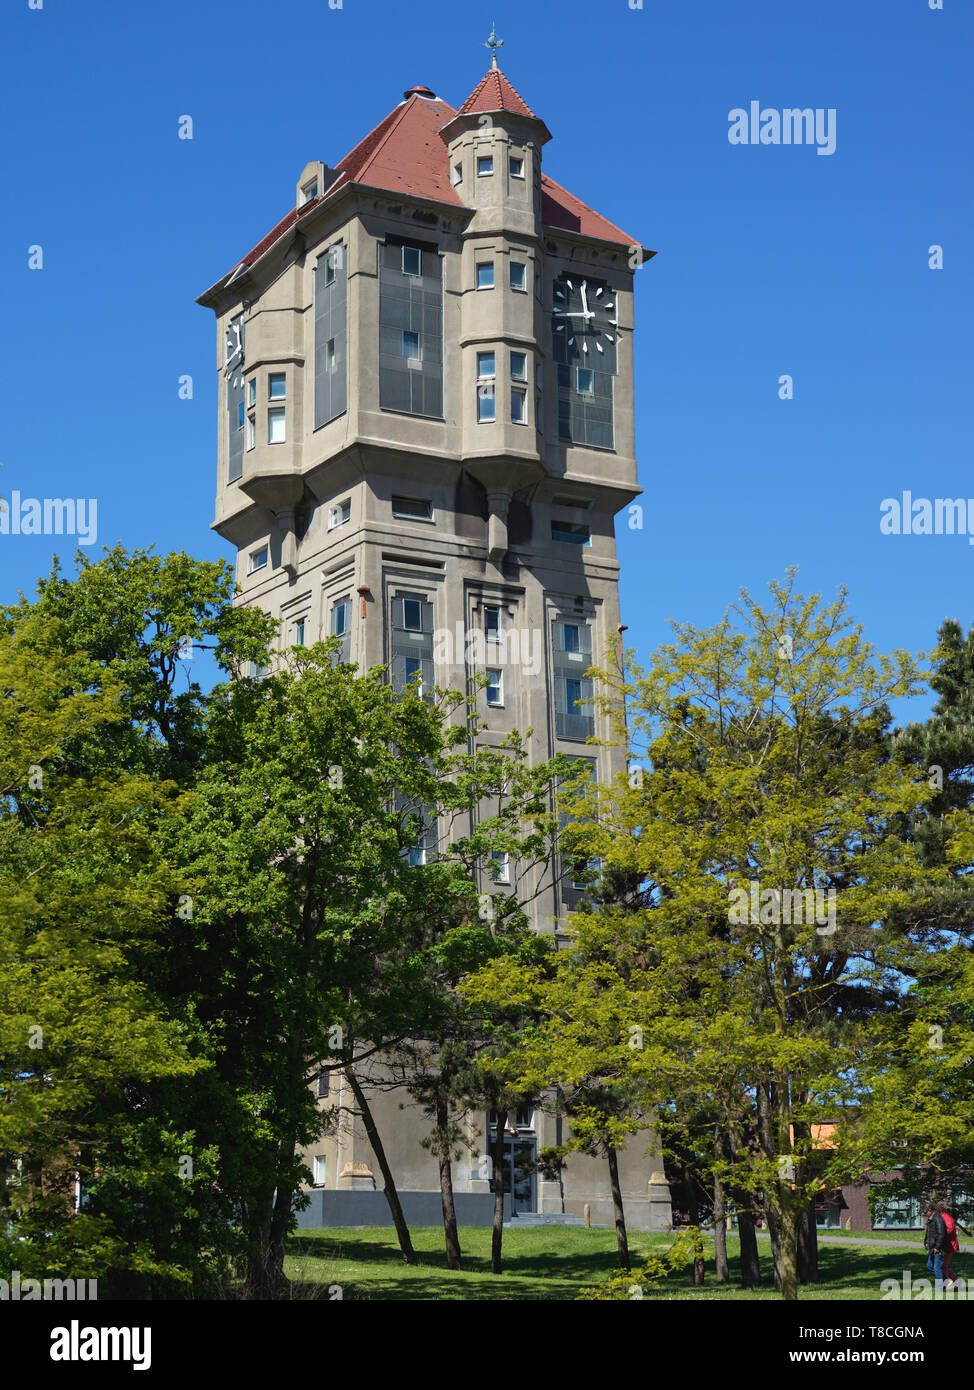 The old Watertower of IJmuiden build in 1915. As watertowers are not needed anymore it has been restructured in luxe condominiums with a grand view. Stock Photo